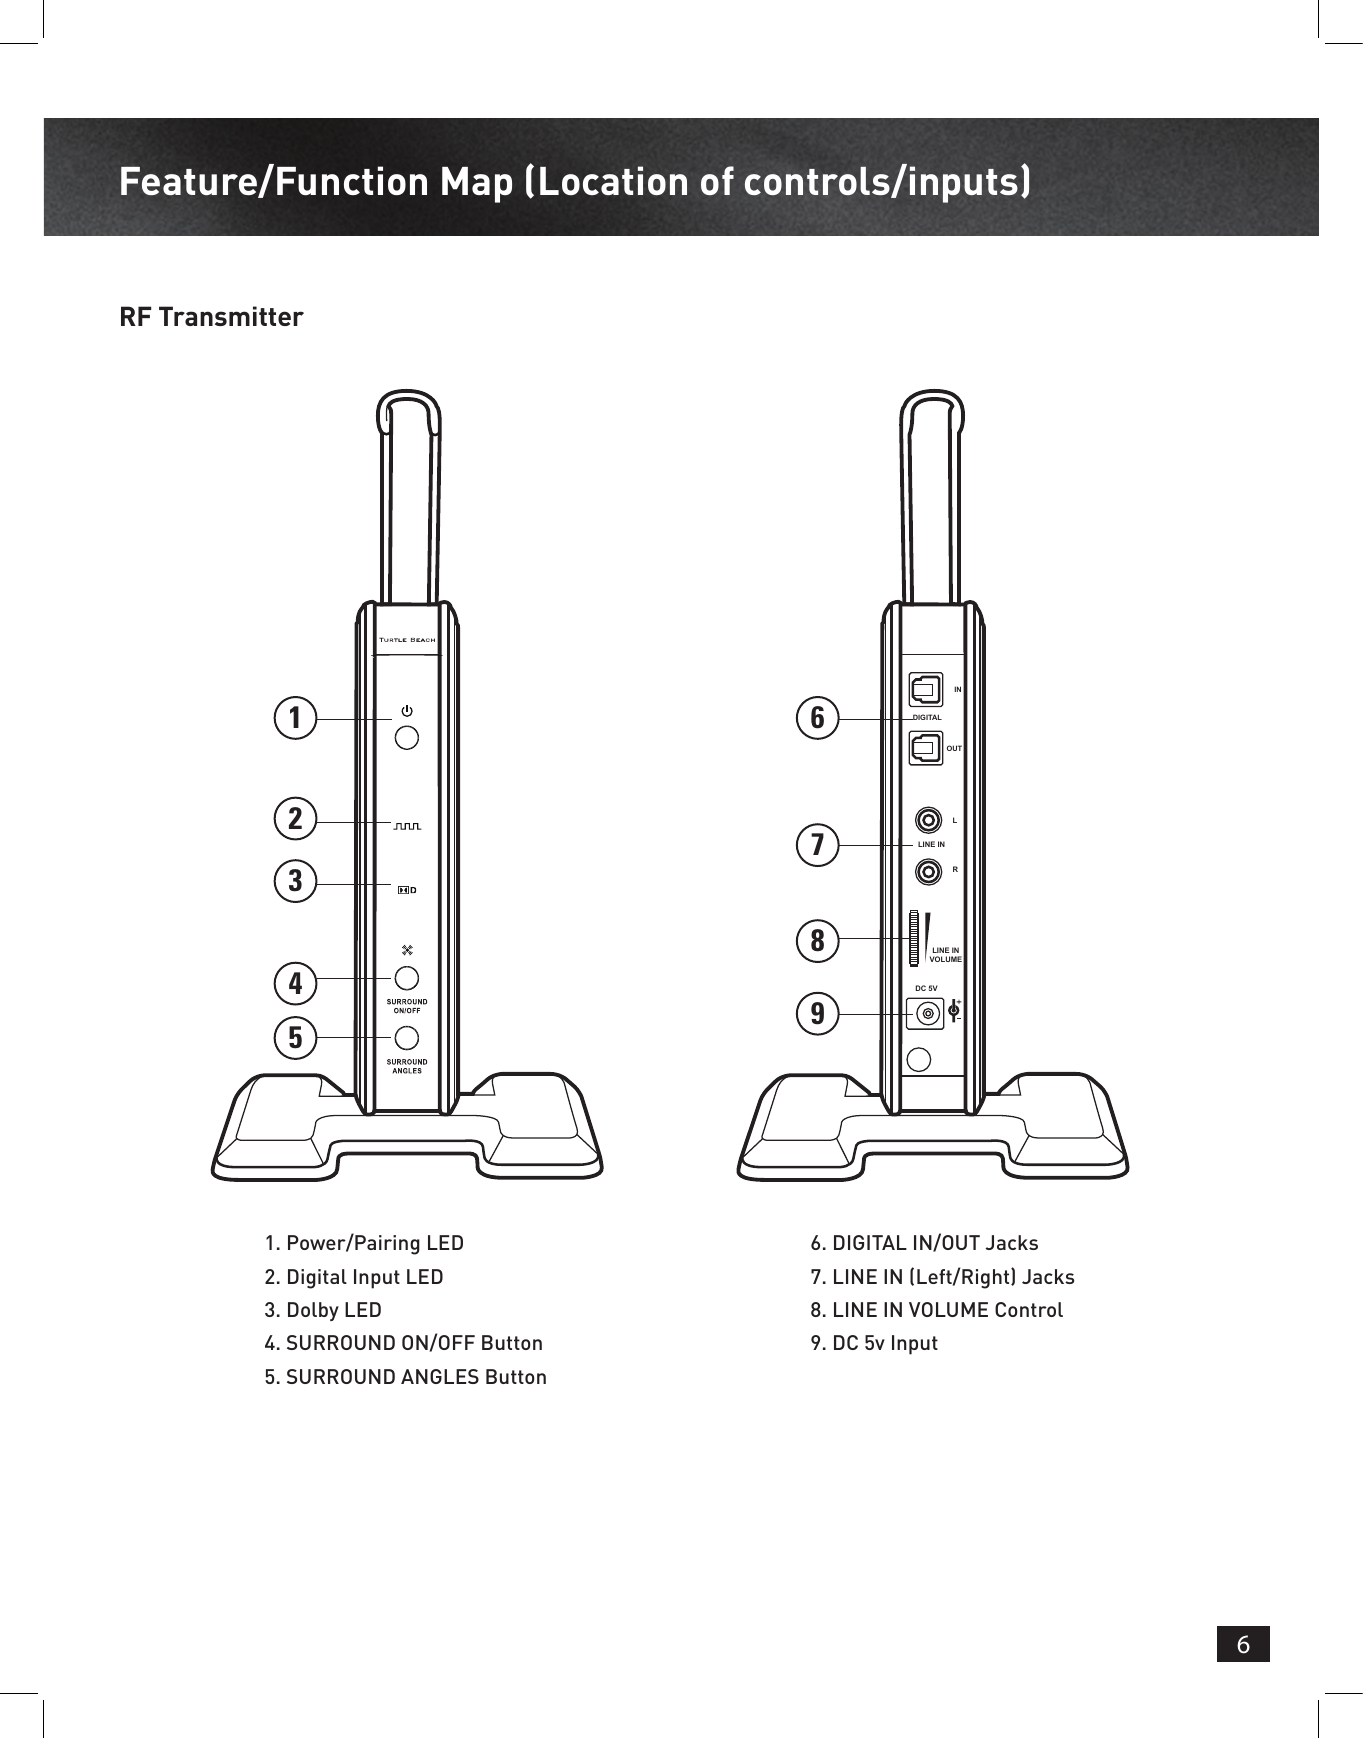 6Feature/Function Map (Location of controls/inputs)RF Transmitter1.  Power/Pairing LED2.  Digital Input LED3.  Dolby LED4.  SURROUND ON/OFF Button5.  SURROUND ANGLES Button6.  DIGITAL IN/OUT Jacks7.  LINE IN (Left/Right) Jacks8.  LINE IN VOLUME Control 9.  DC 5v Input152348967DIGITALINOUTLLINE INLINE INVOLUMEDC 5VR